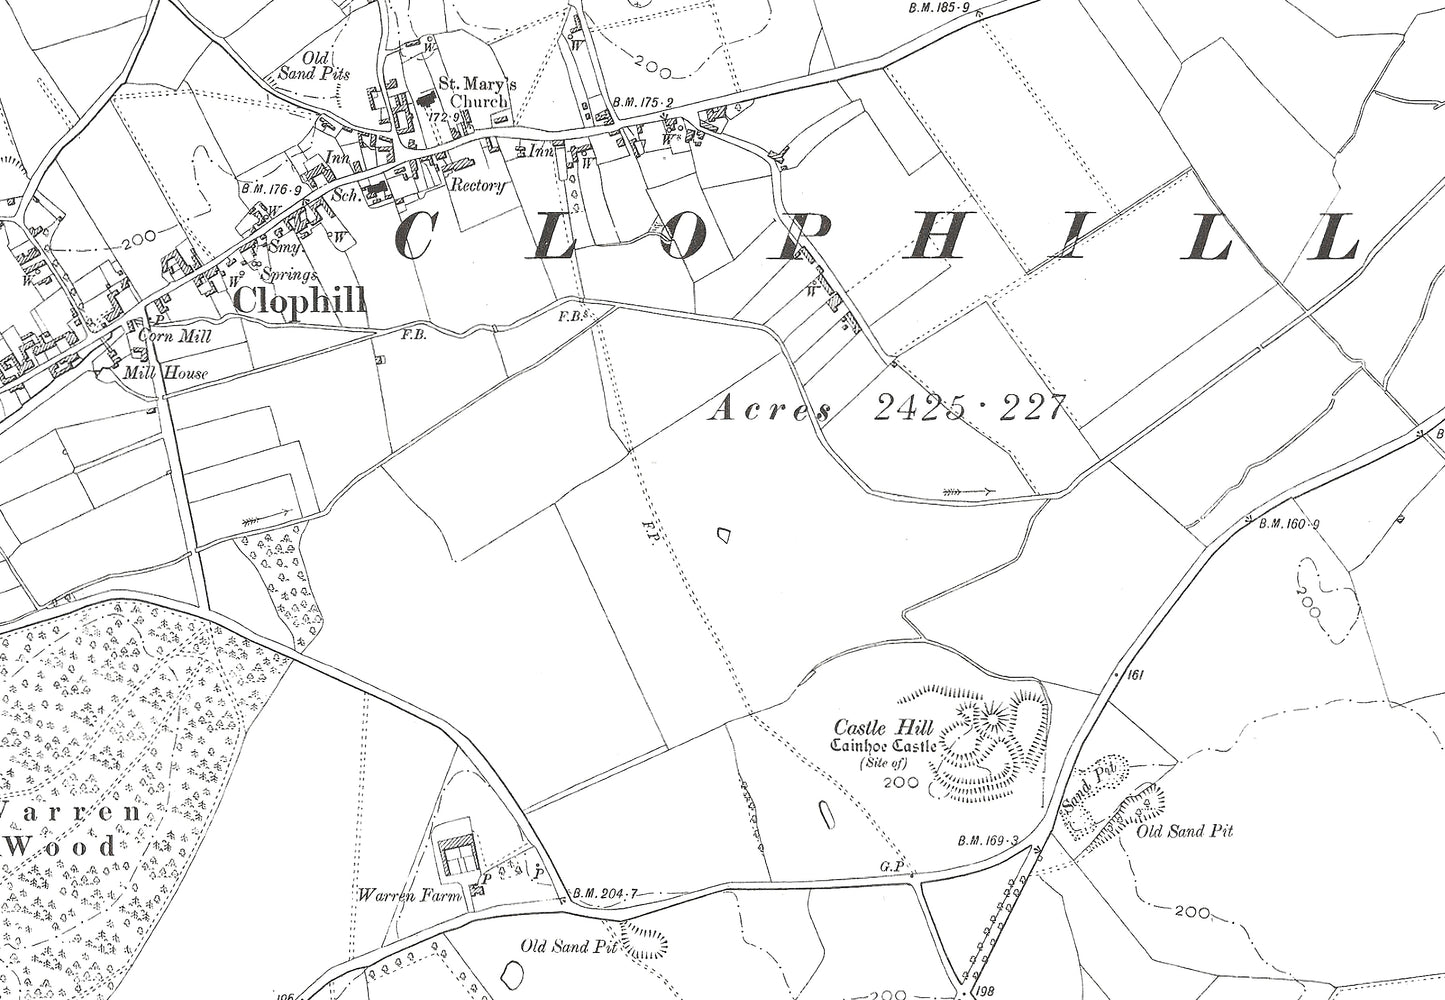 A 1902 map showing Clophill in Bedfordshire - A Digital Download 0f OS 1:10560 scale map, Beds 22SW